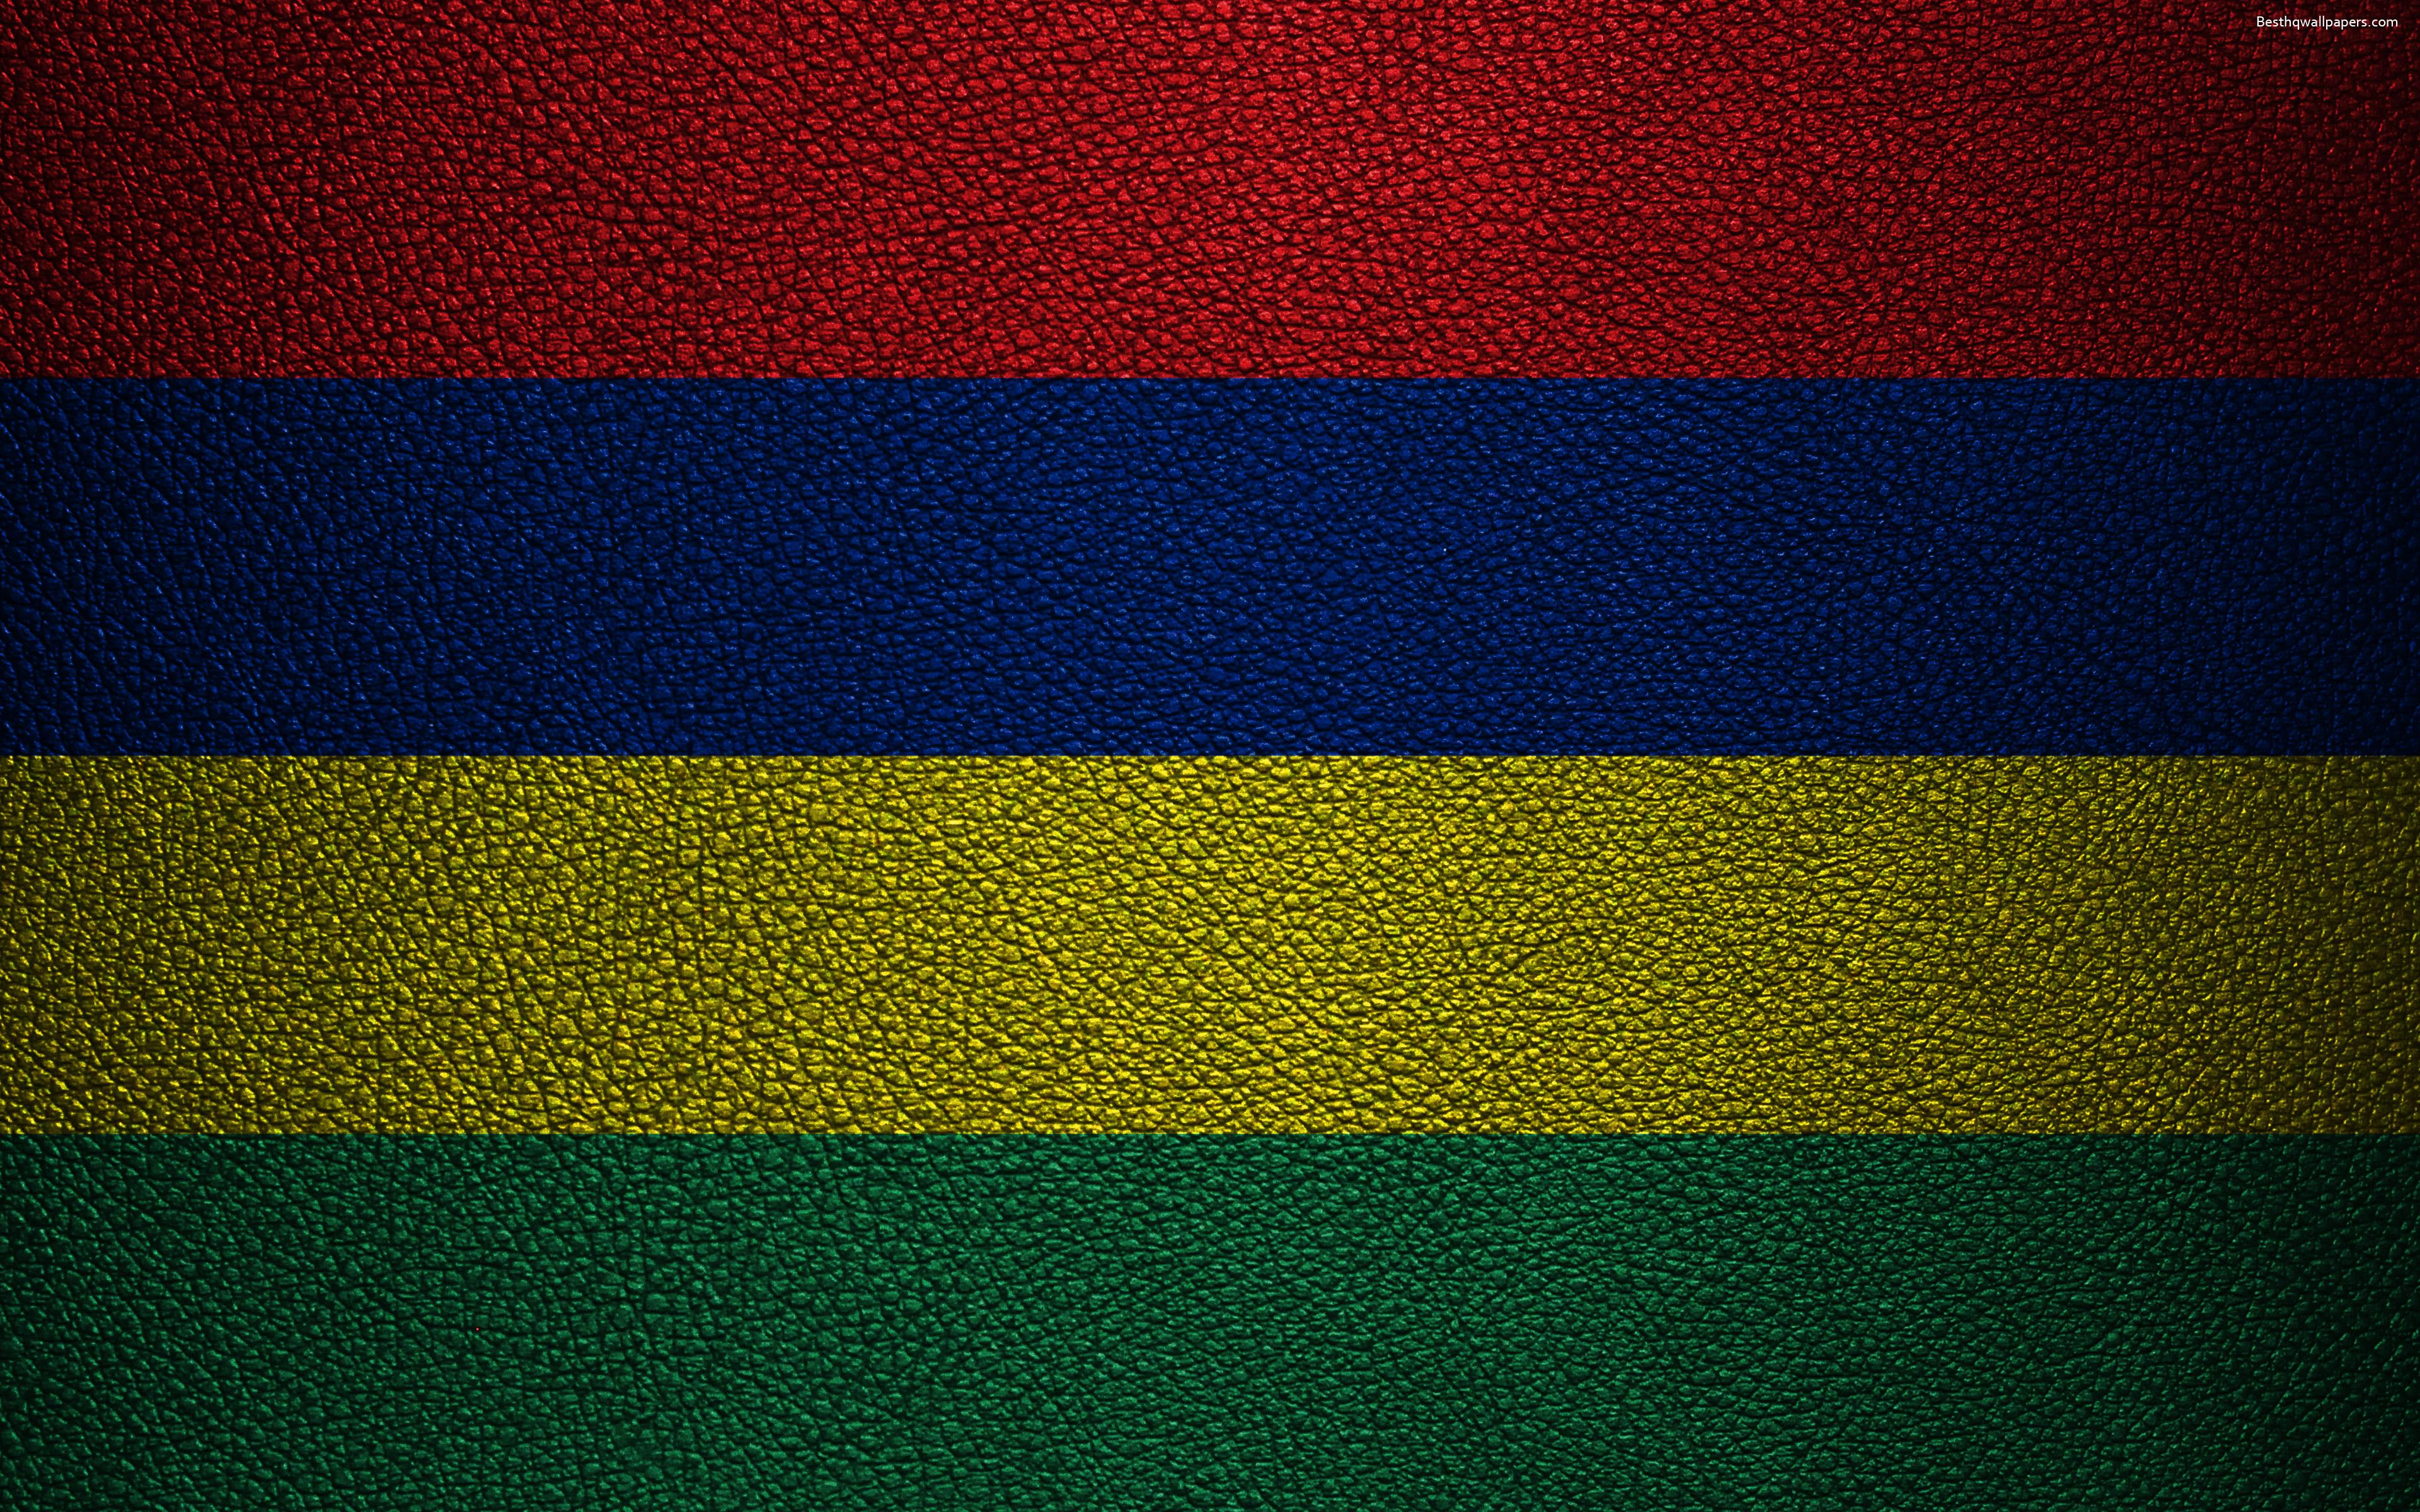 Download wallpaper Flag of Mauritius, 4k, leather texture, Africa